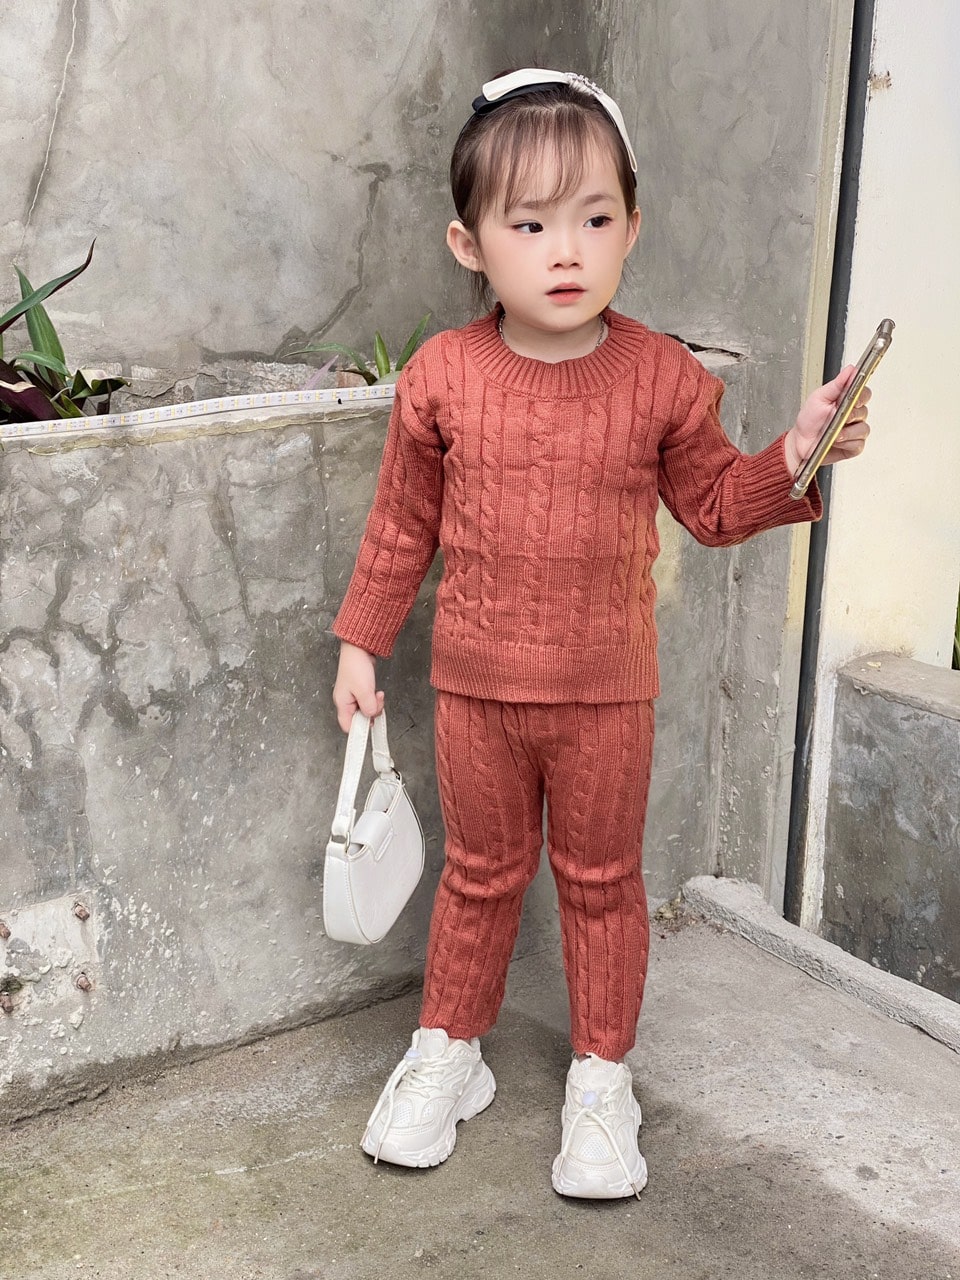 Kids Clothes Girls Factory Price 100% Wool Woolen Set Casual Each One In Opp Bag From Vietnam Manufacturer 4